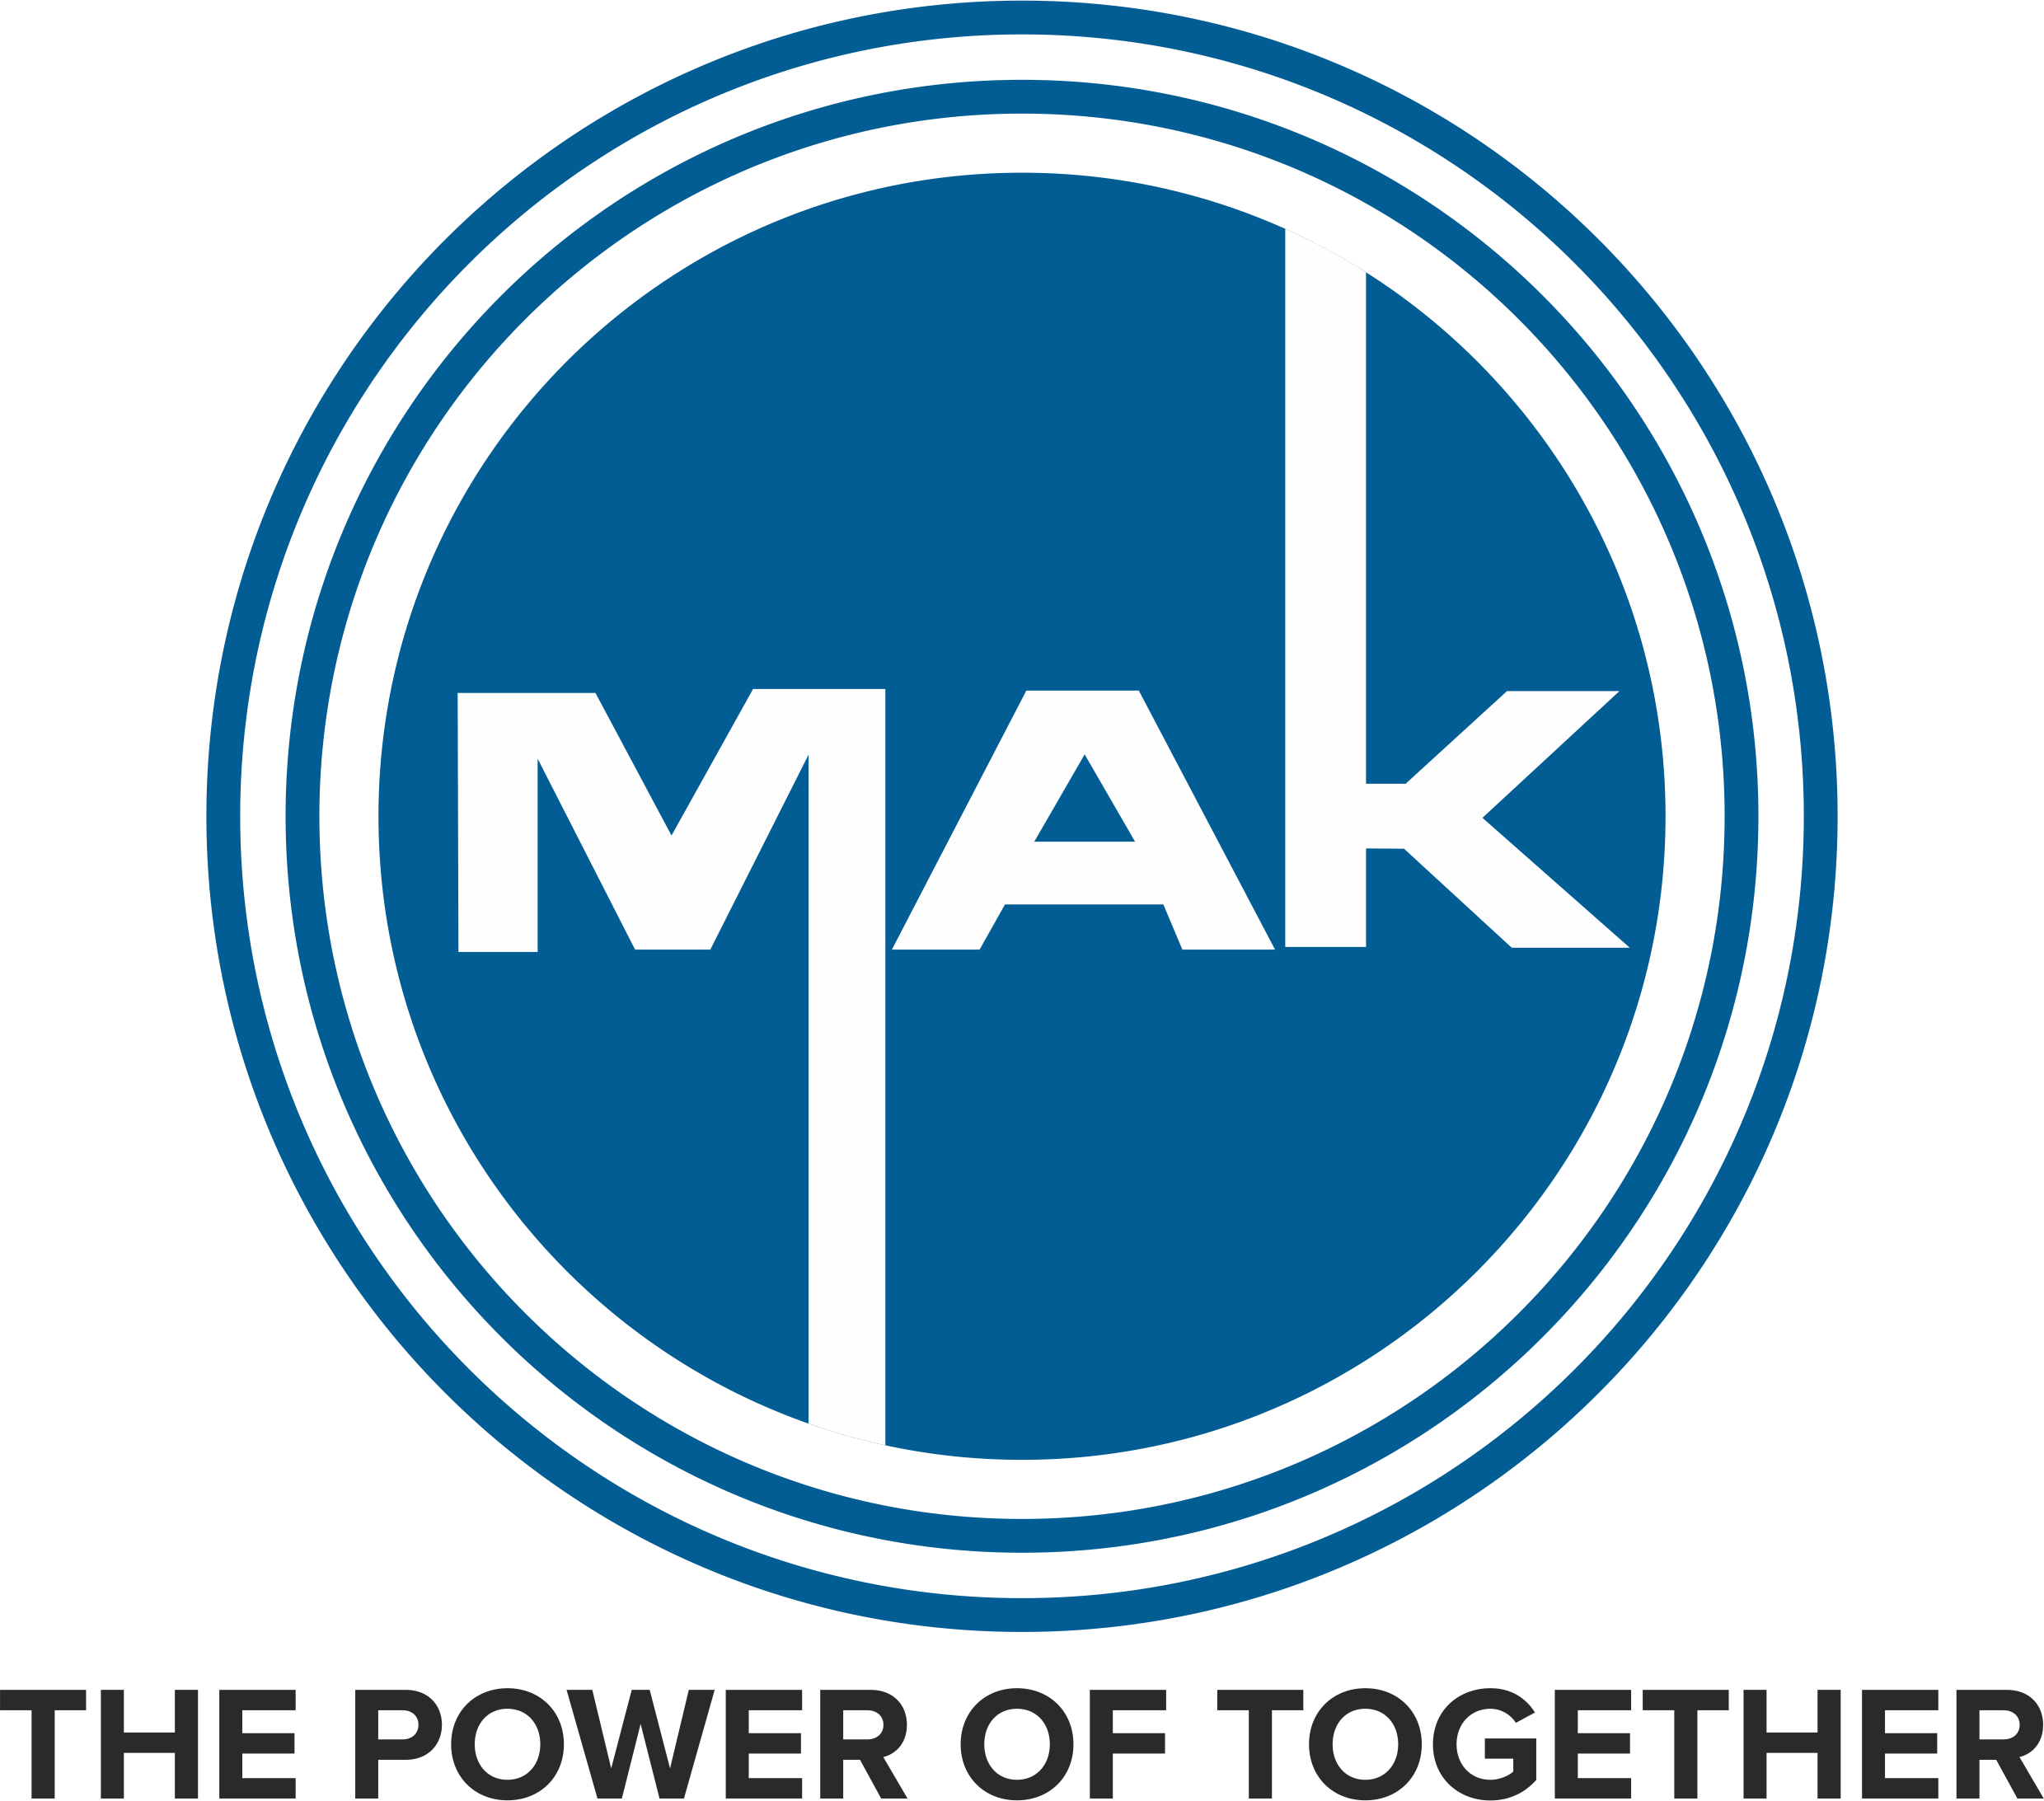 Mak Power is a building materials and equipment trading company